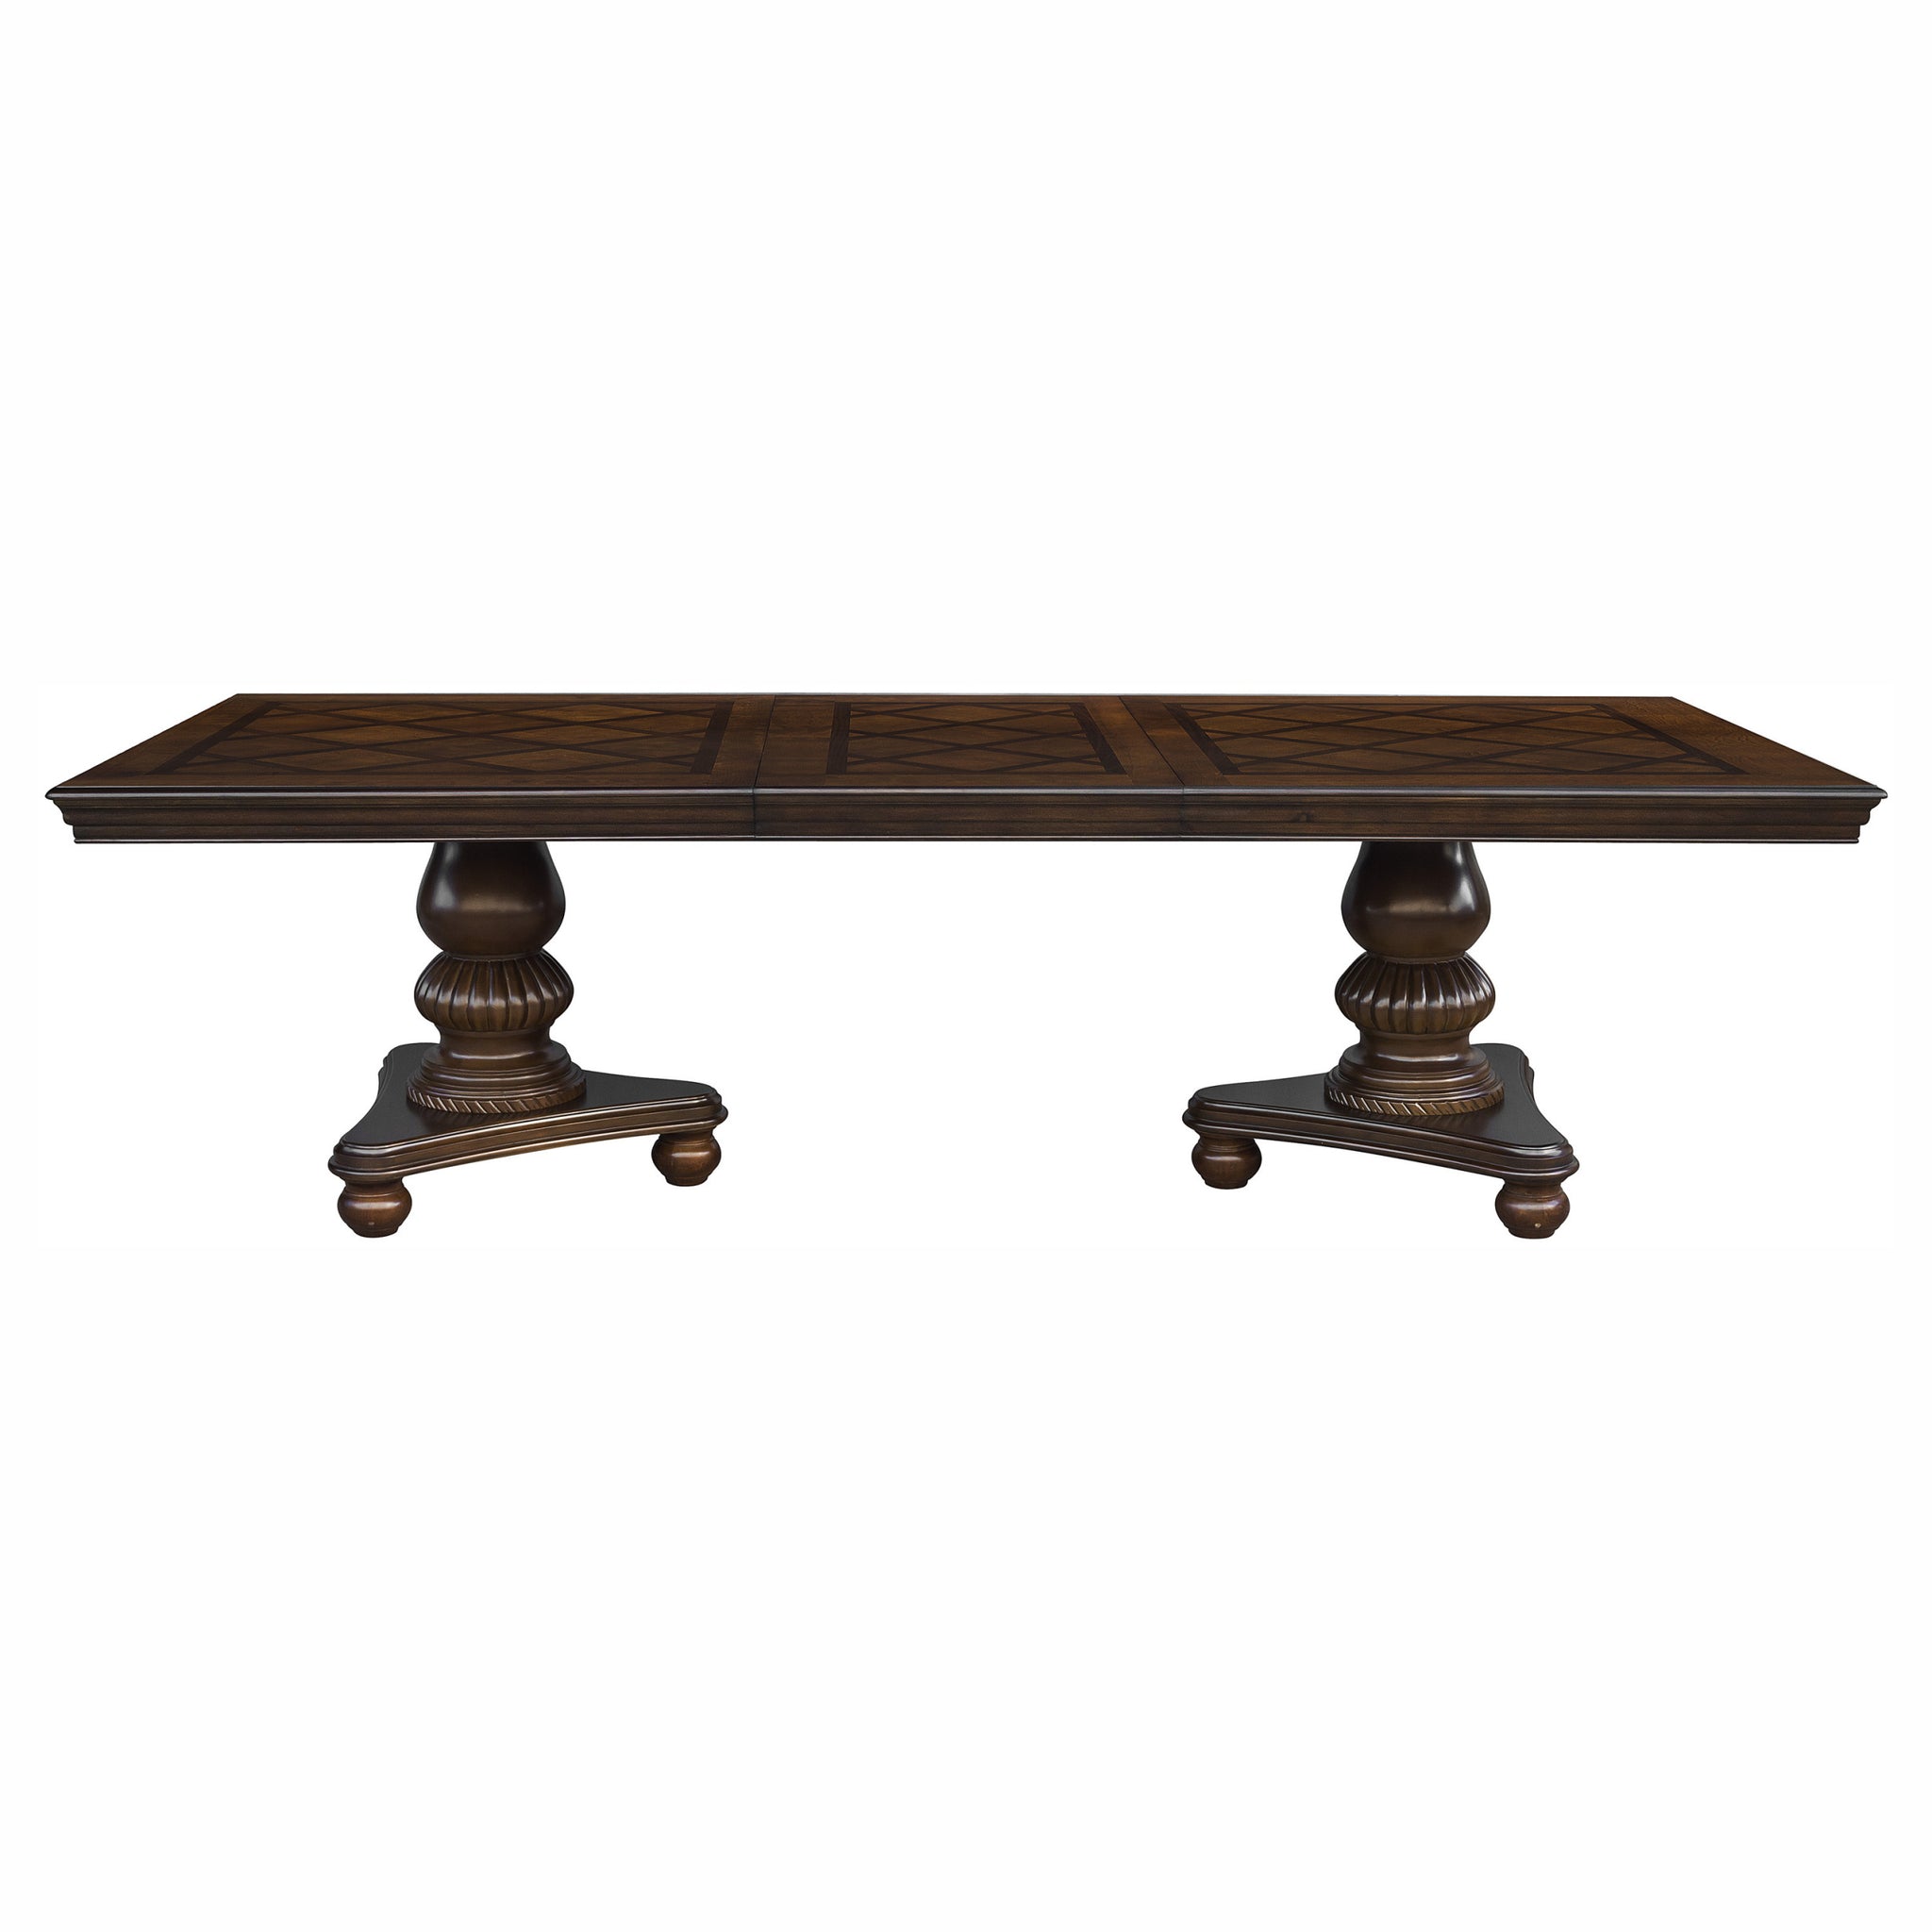 Traditional Style Dining Room Table w Leaf 2x wood-wood-brown mix-seats 8-wood-dining